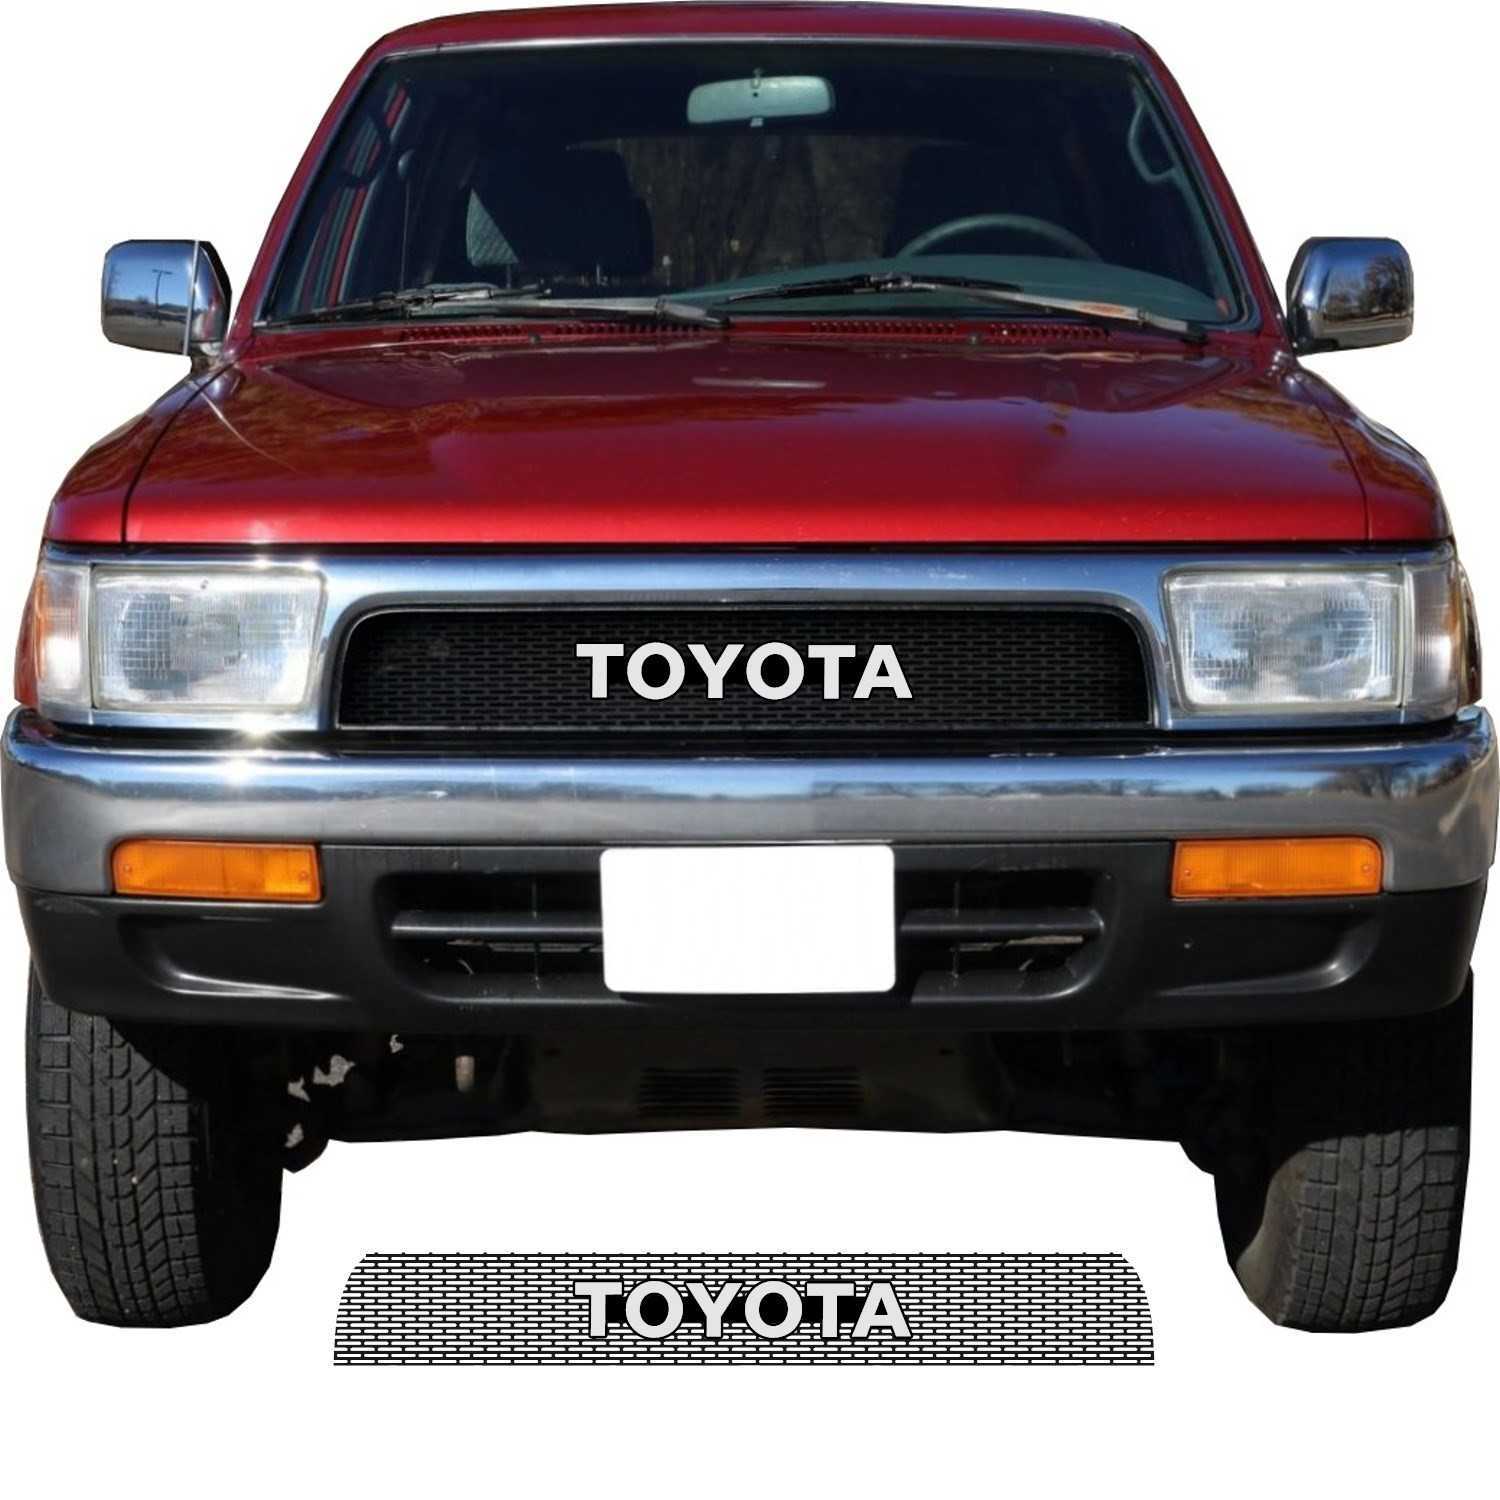 Introducing Satsohi Mesh Grille for 1992-95 Toyota 4Runner